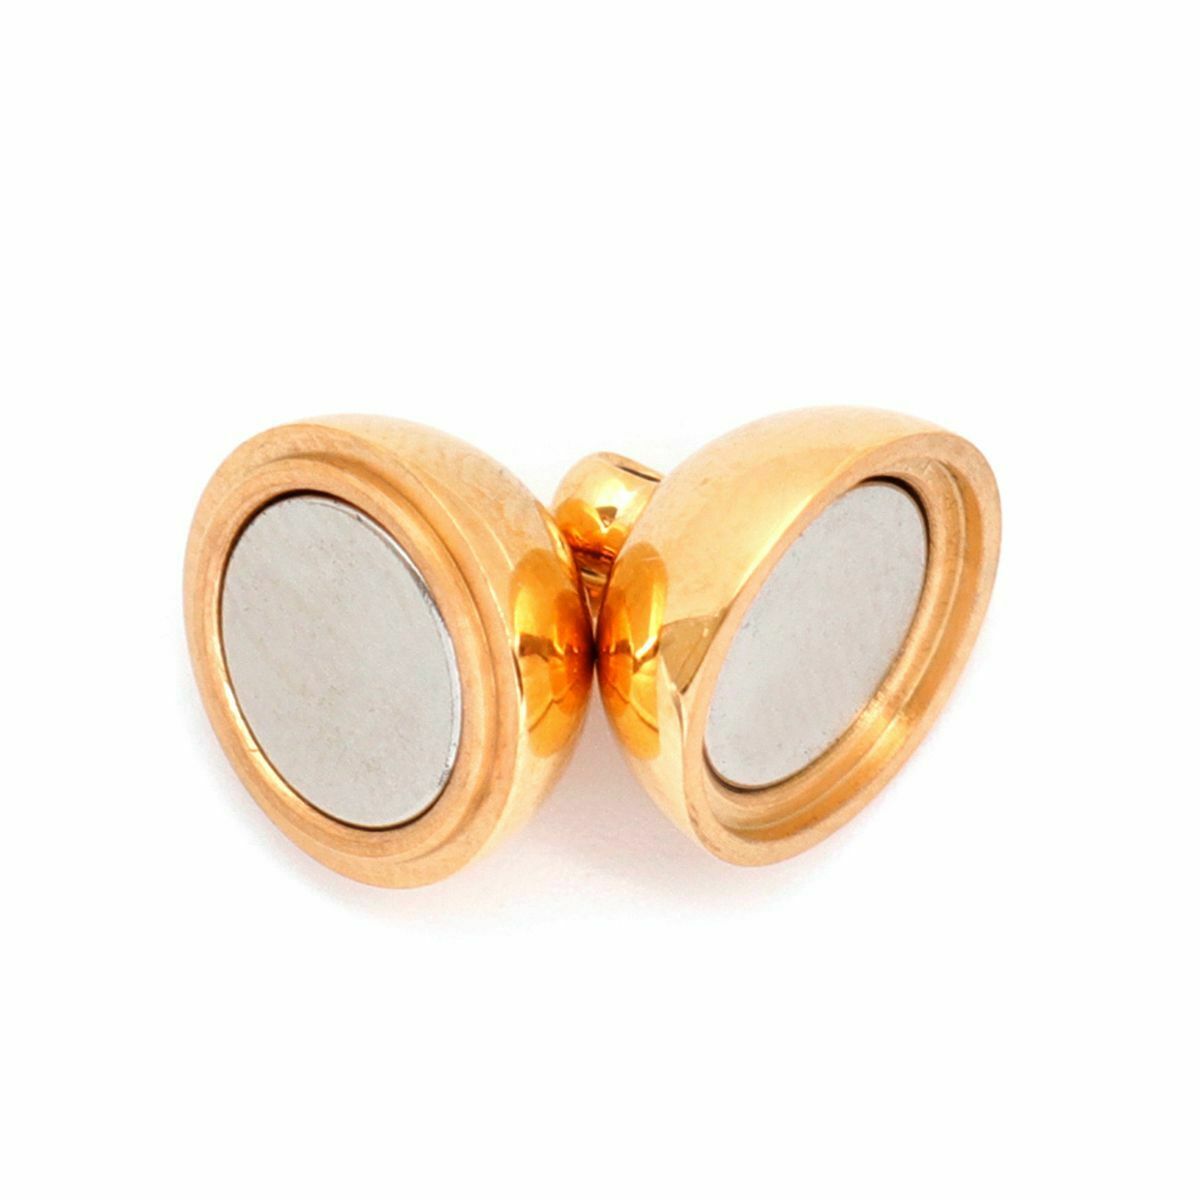 10mm Stainless Steel Magnetic Clasps Round Gold Plated 15mm x 10mm